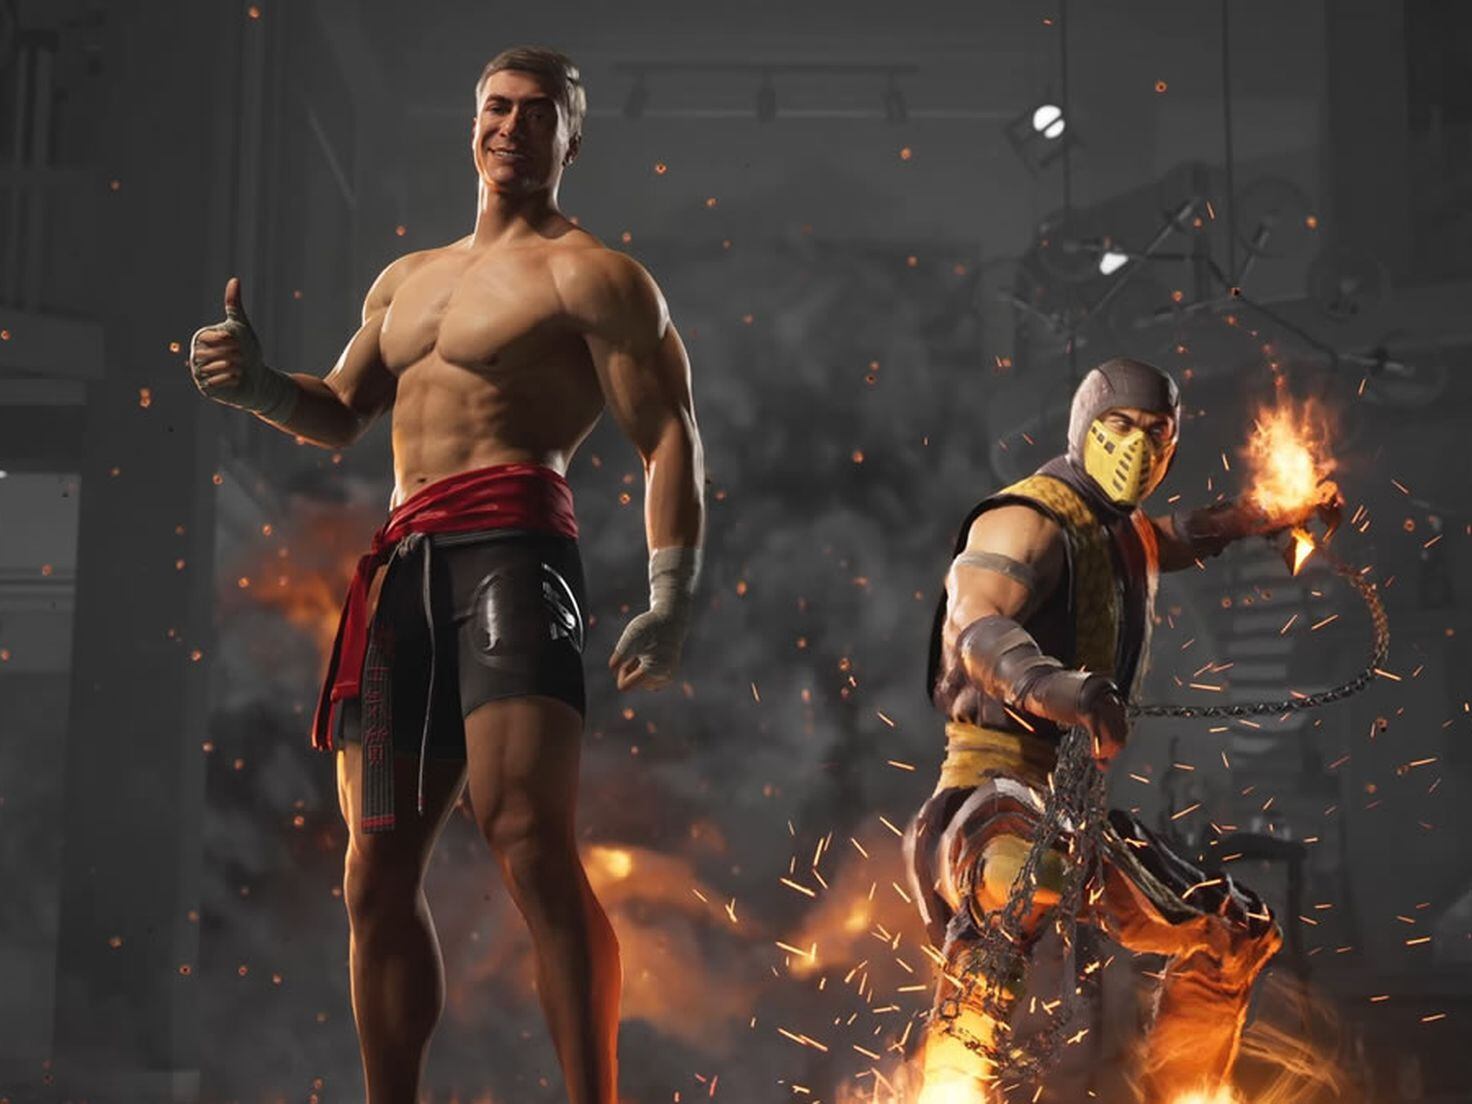 Van Damme unleashed: Official trailer of Johnny Cage's new skin in